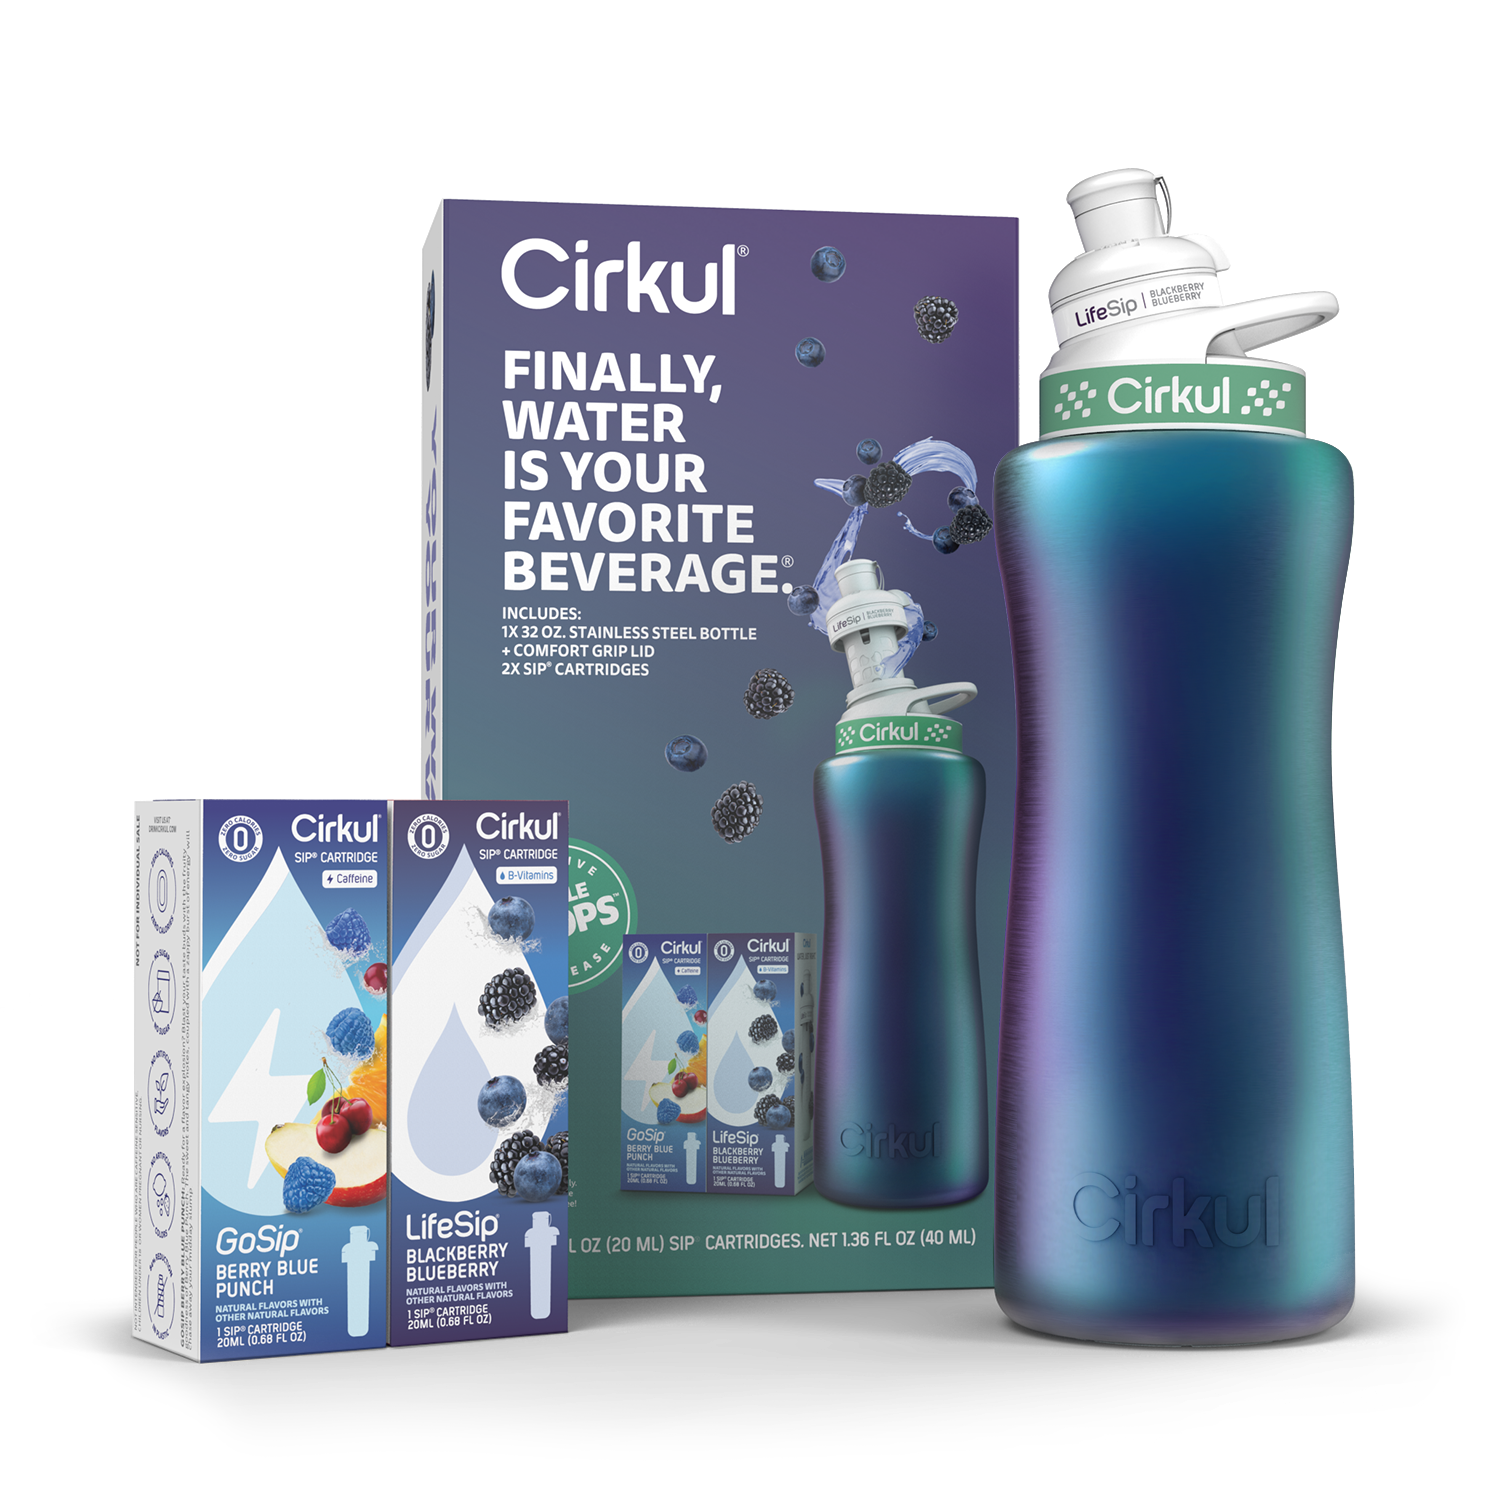 Cirkul 32oz Chameleon Stainless Steel Starter Kit with Teal & White Cirkul Lid 2.0 and 2 Flavor Cartridges (Blackberry Blueberry & Berry Blue Punch) - image 1 of 5